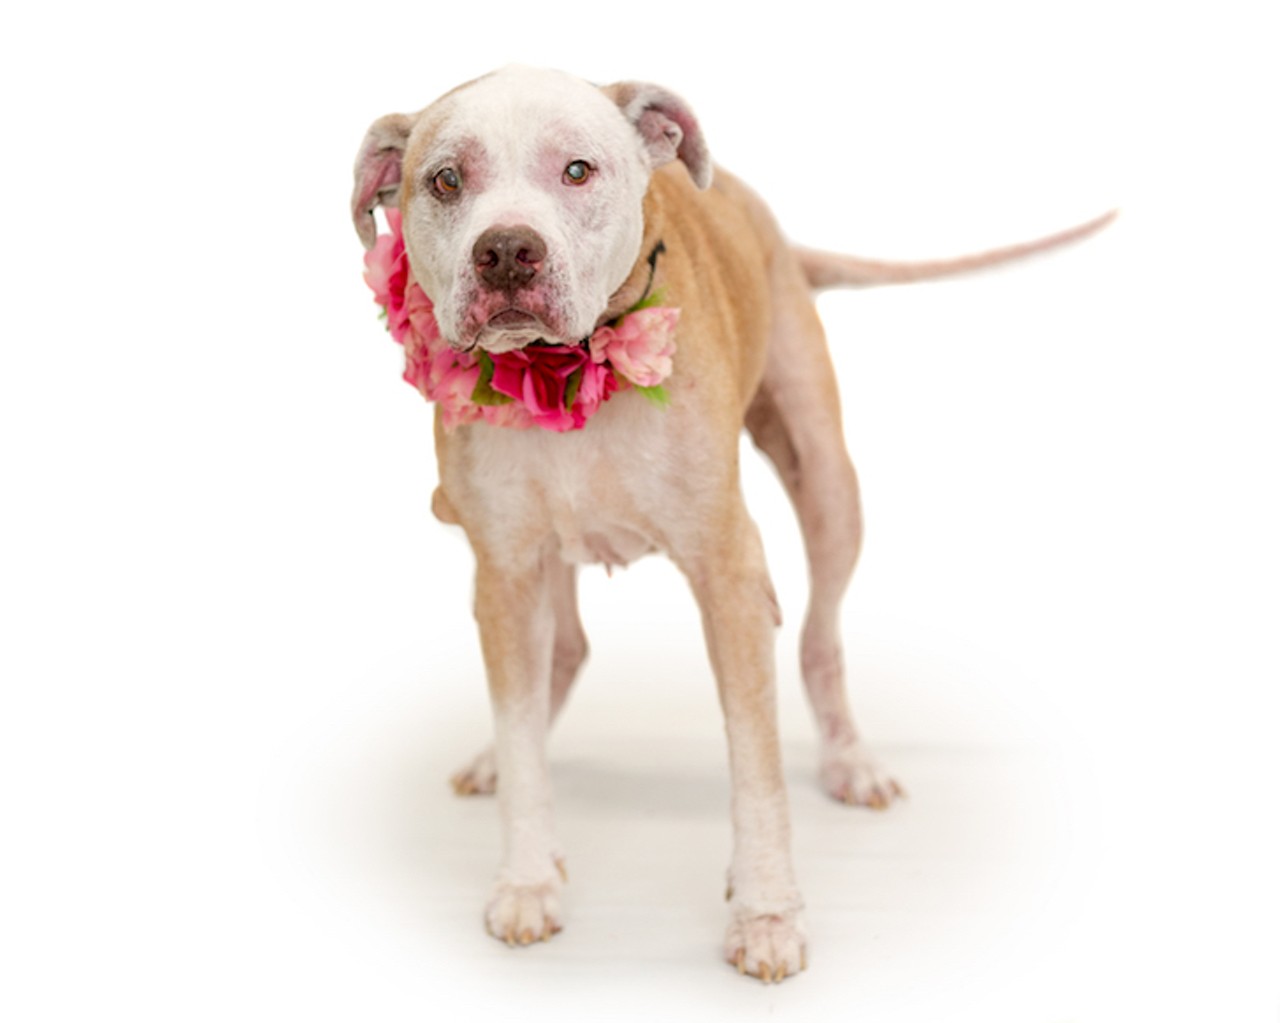 24 adoptable pups waiting to meet you at Orange County Animal Services